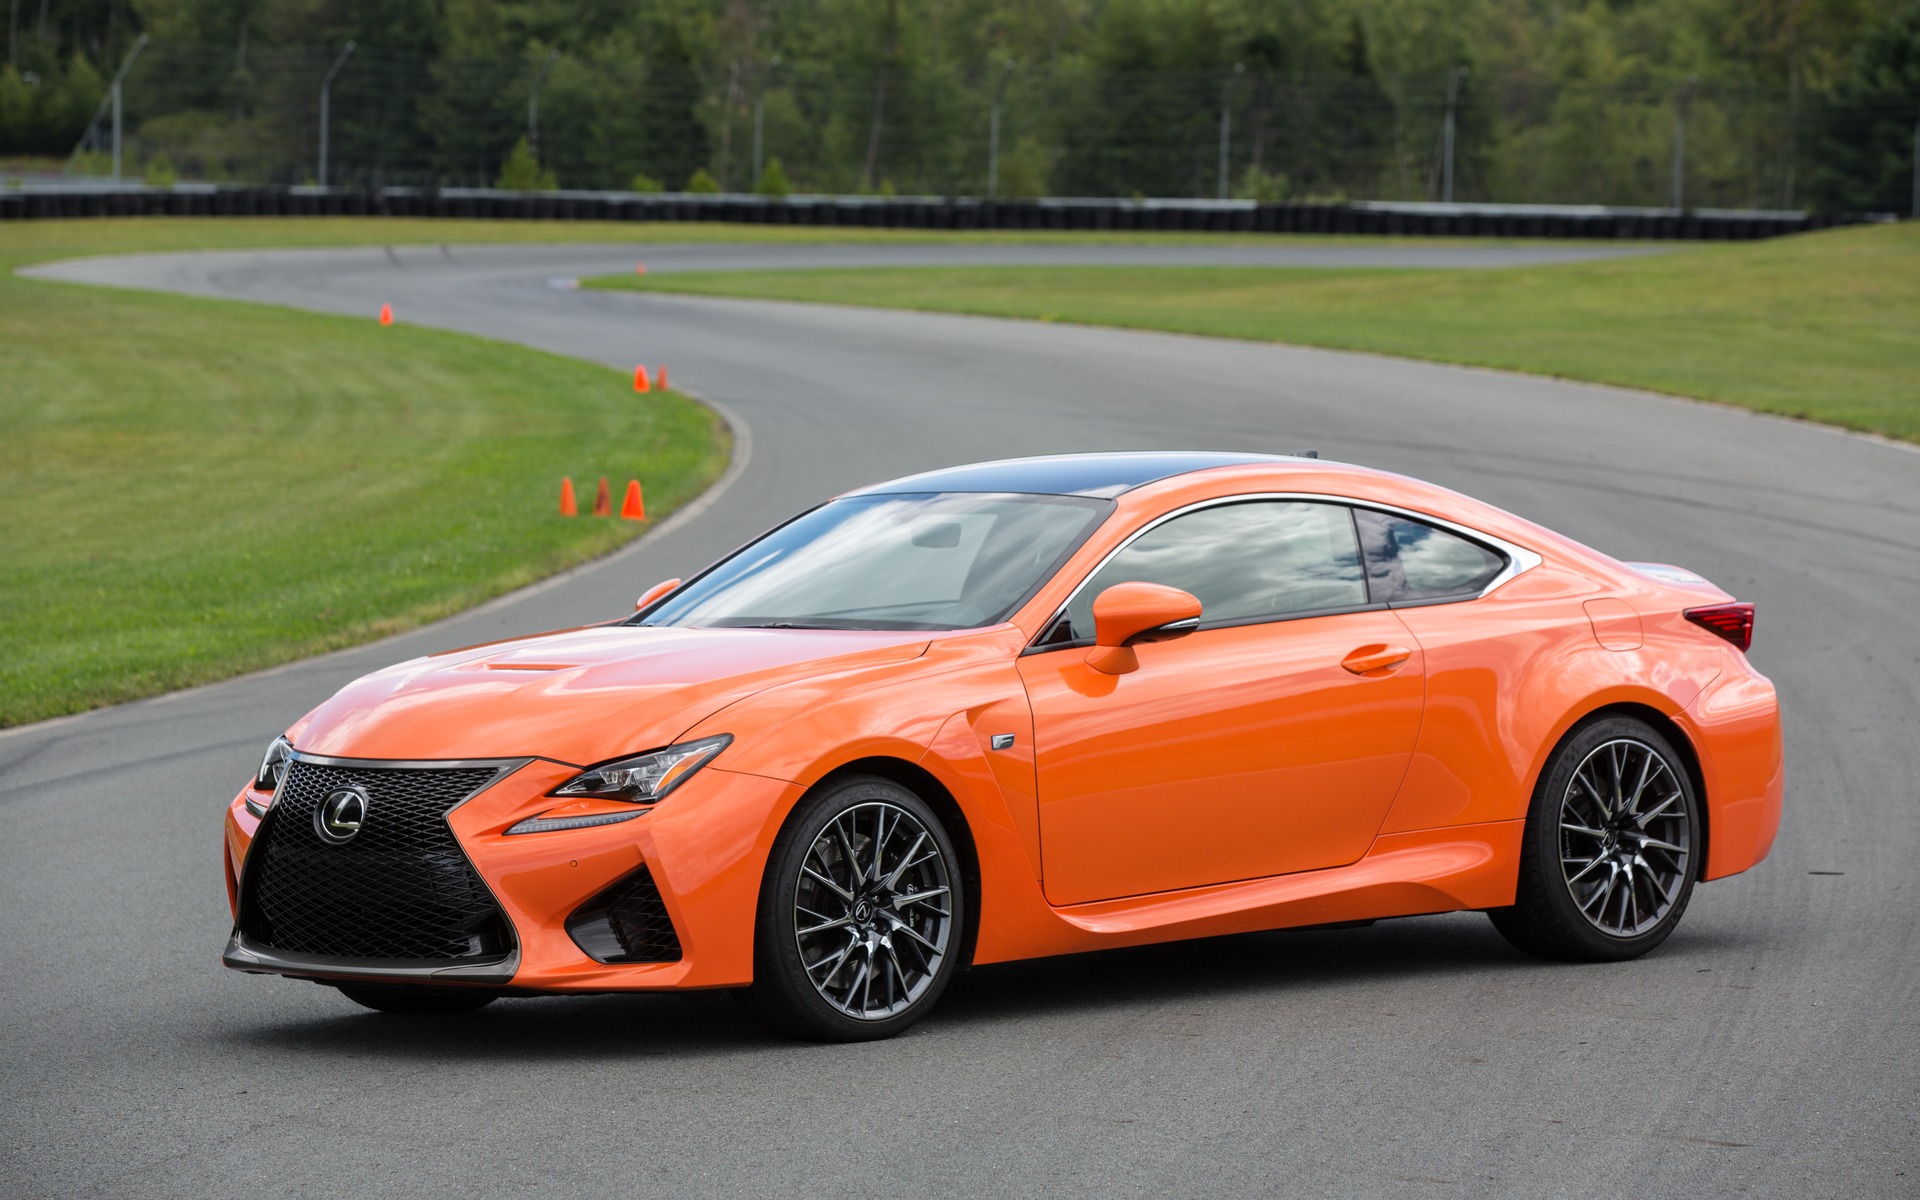 2017 Lexus Rc News Reviews Picture Galleries And Videos The Car Guide